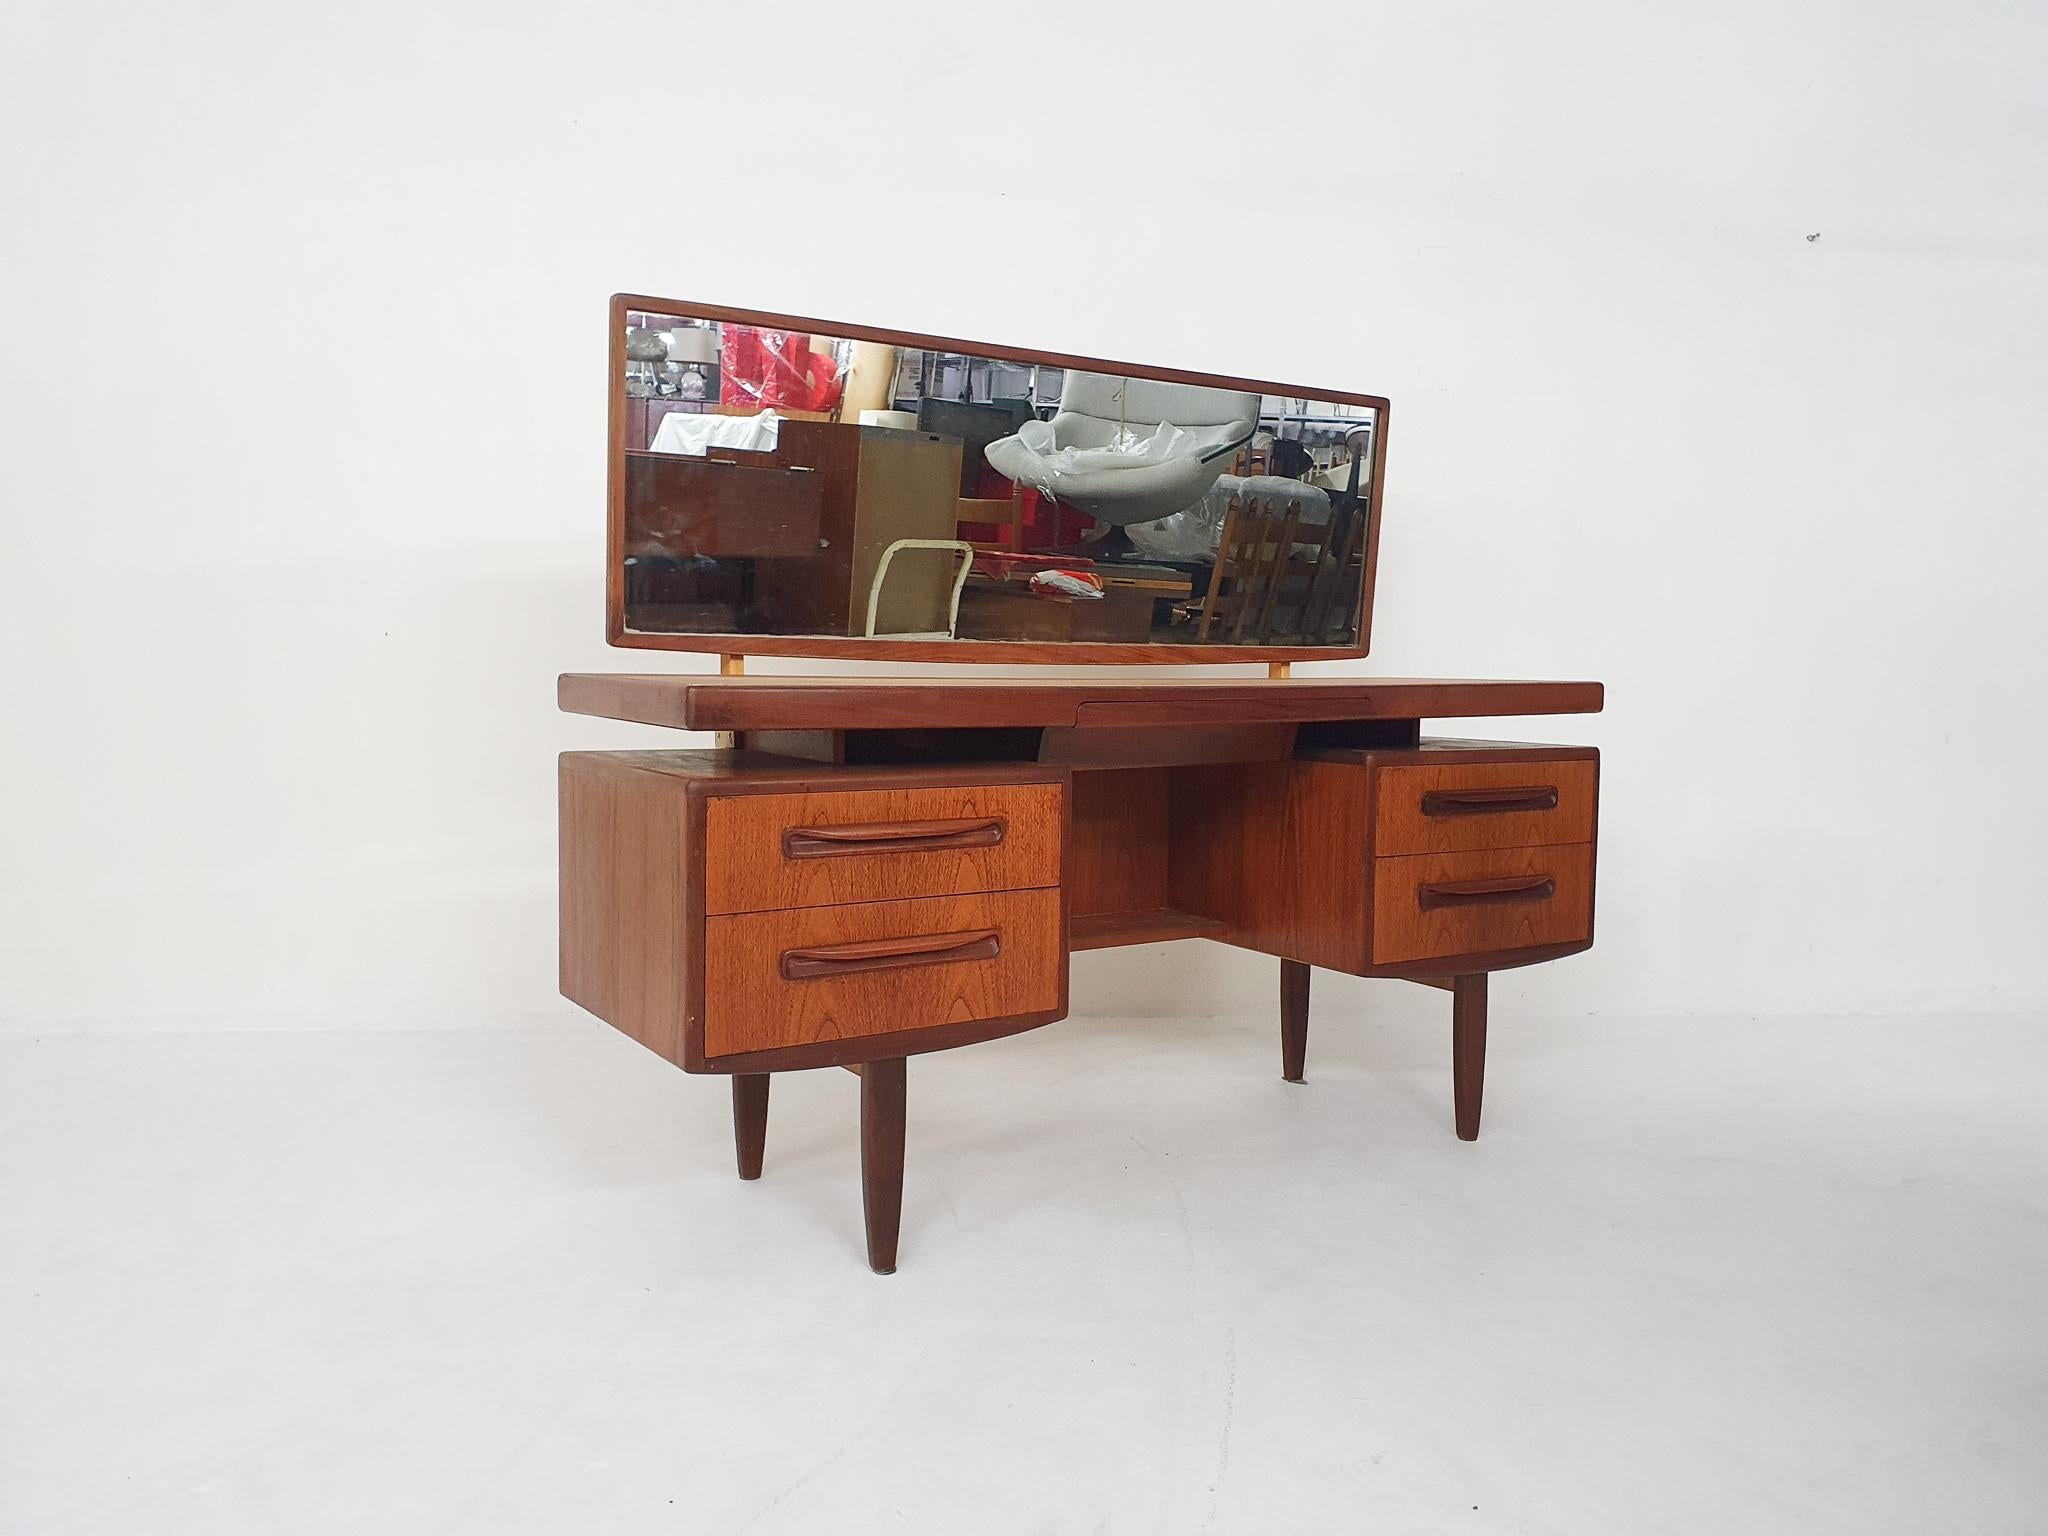 Teak vanity designed by Victor Wilkins for G-plan in the united Kingdom in 1960's
With four drawers and a small drawer in the middle for jewelry. The mirror can swivel up and down.

The attachment of the mirror has been reinforced with some